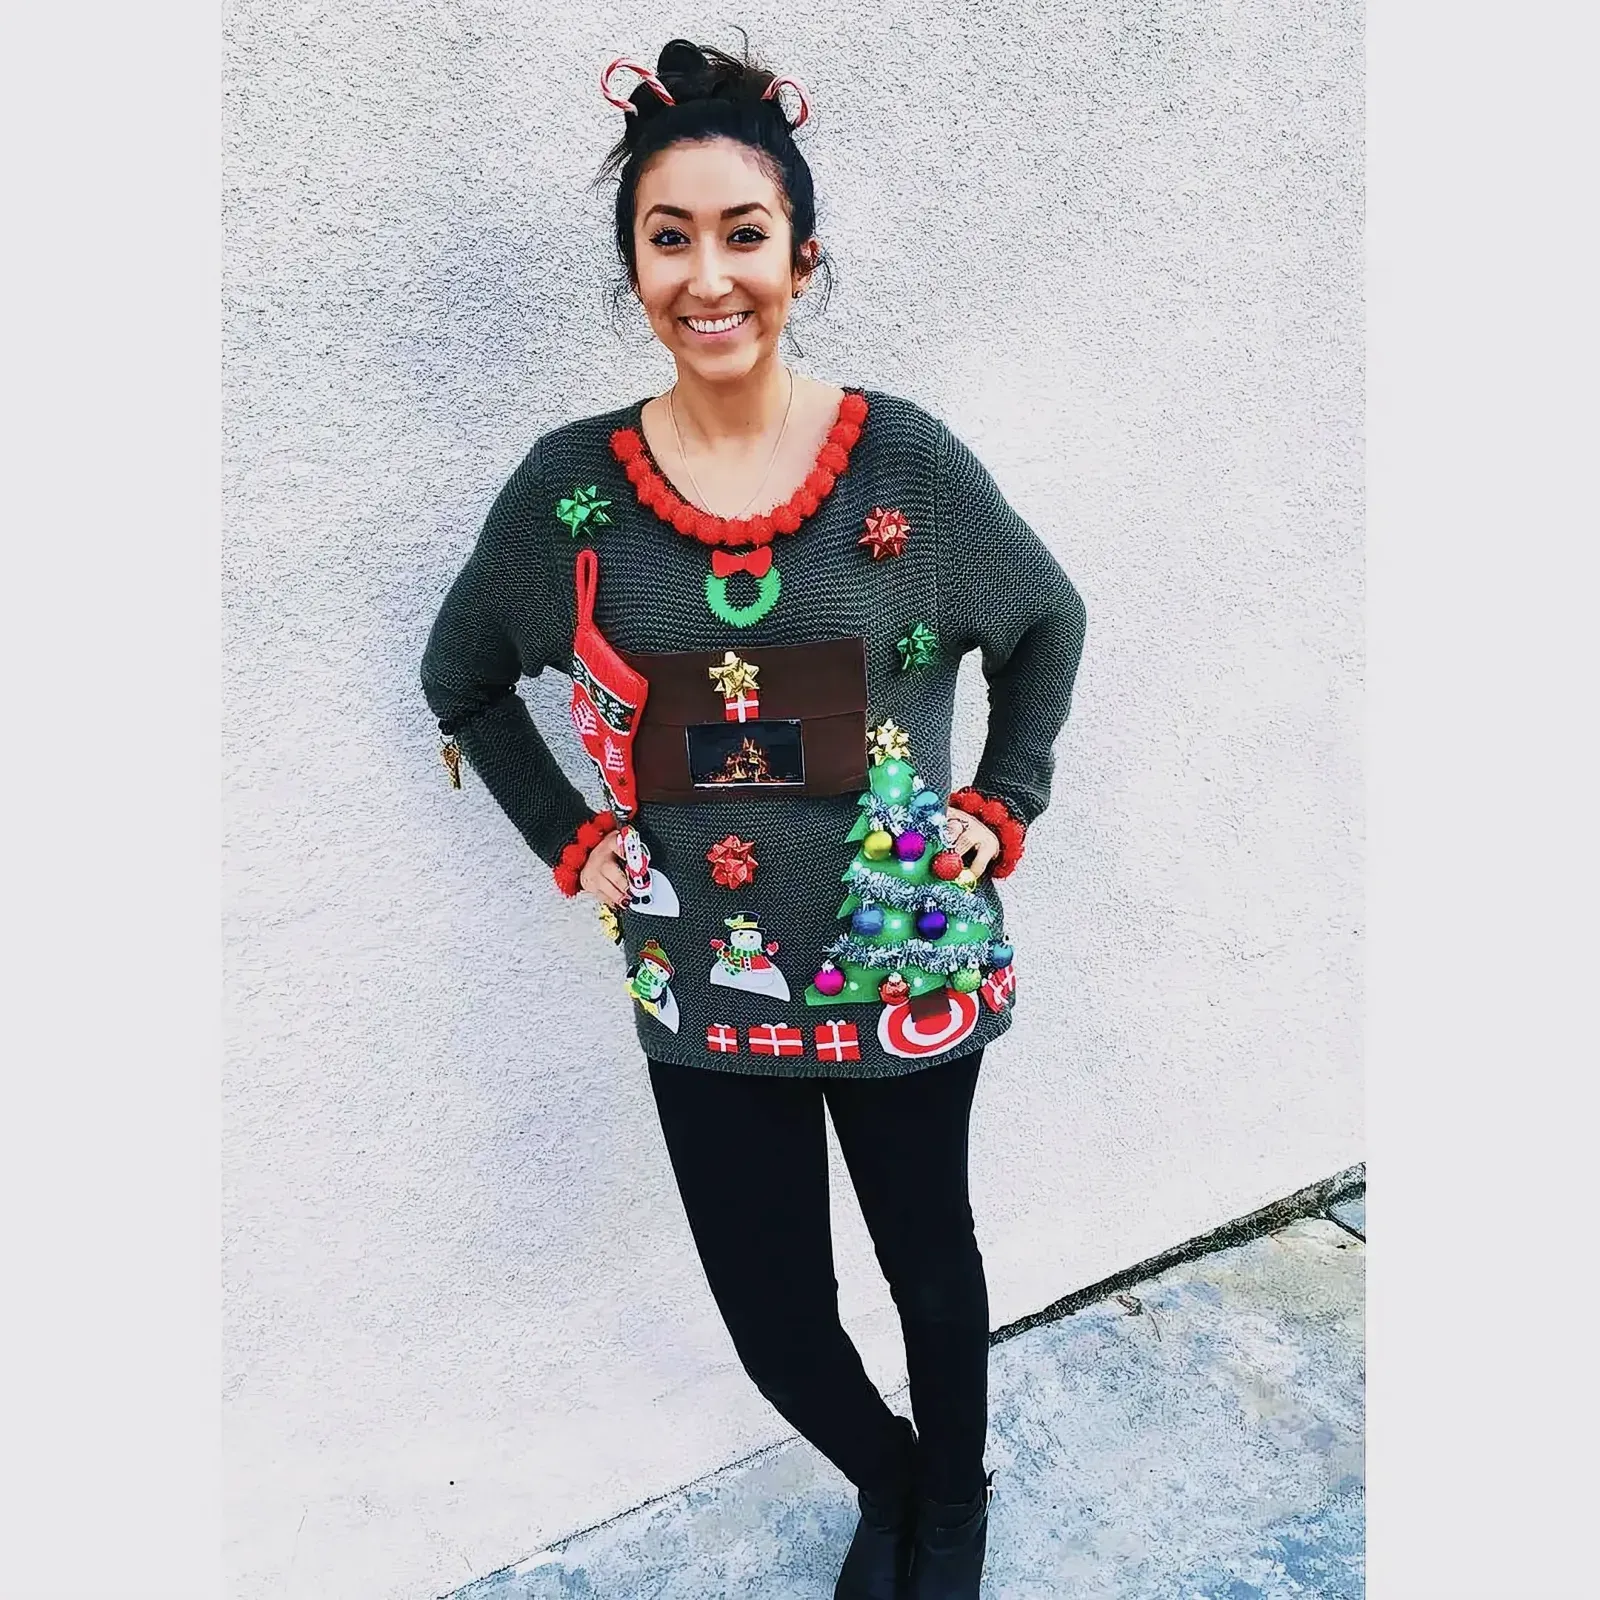 Woman wearing a trendy Christmas sweater with festive decorations